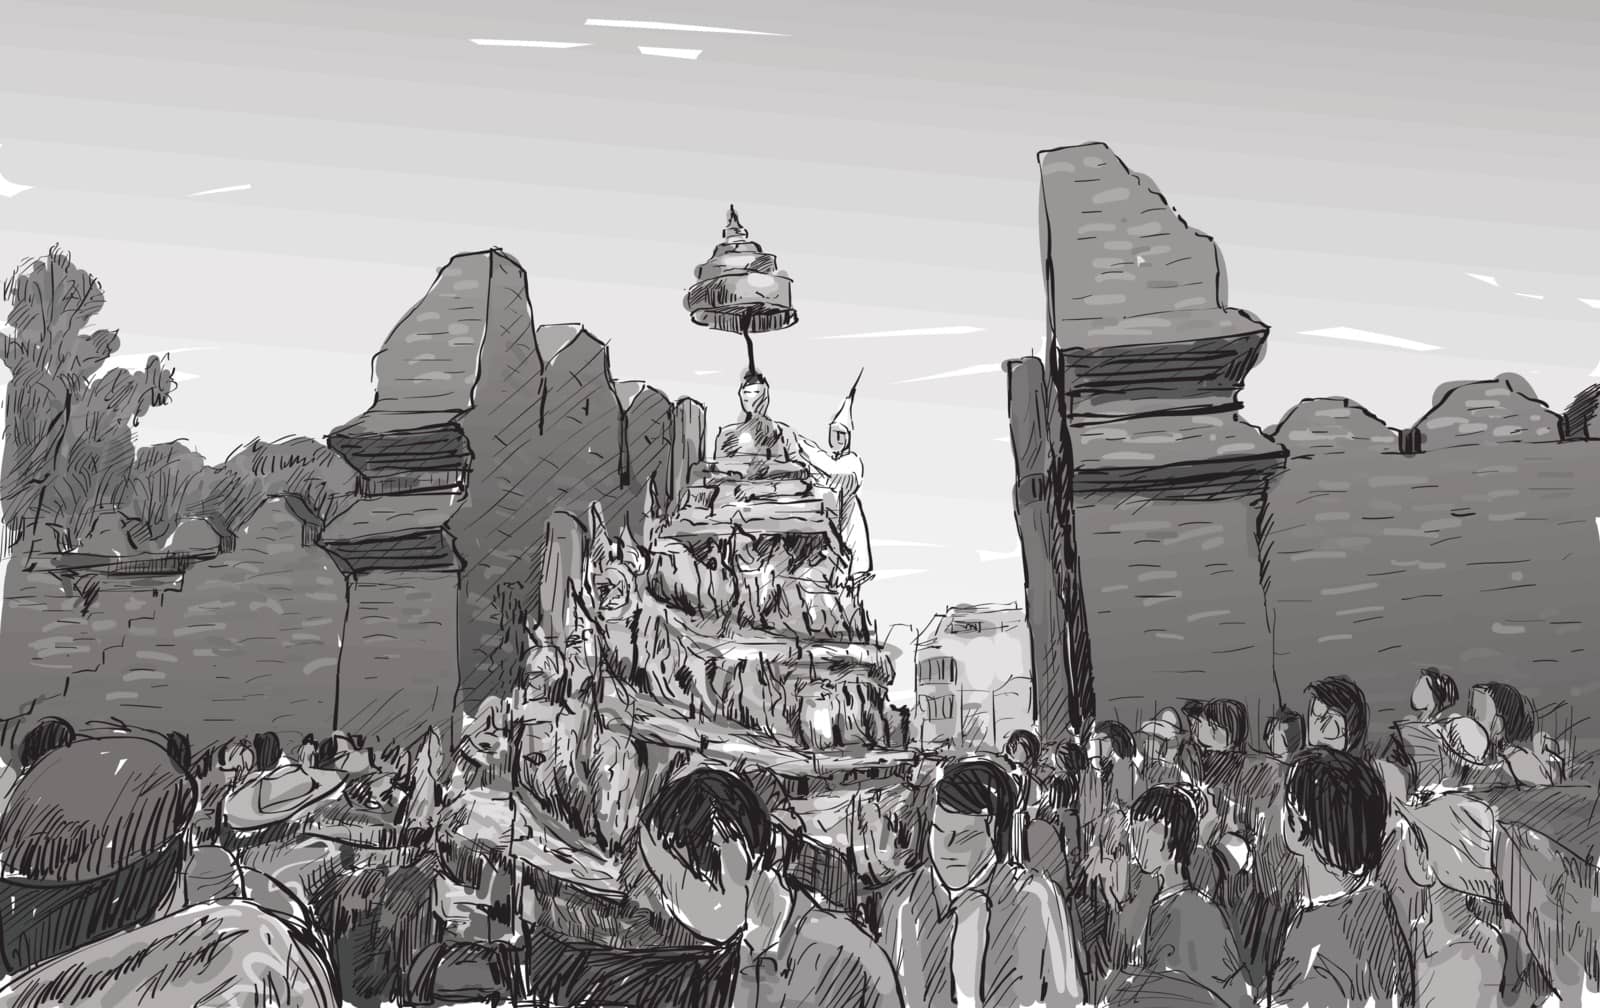 Sketch of cityscape in Thailand show traditional parade "Songkra by arnontphoto